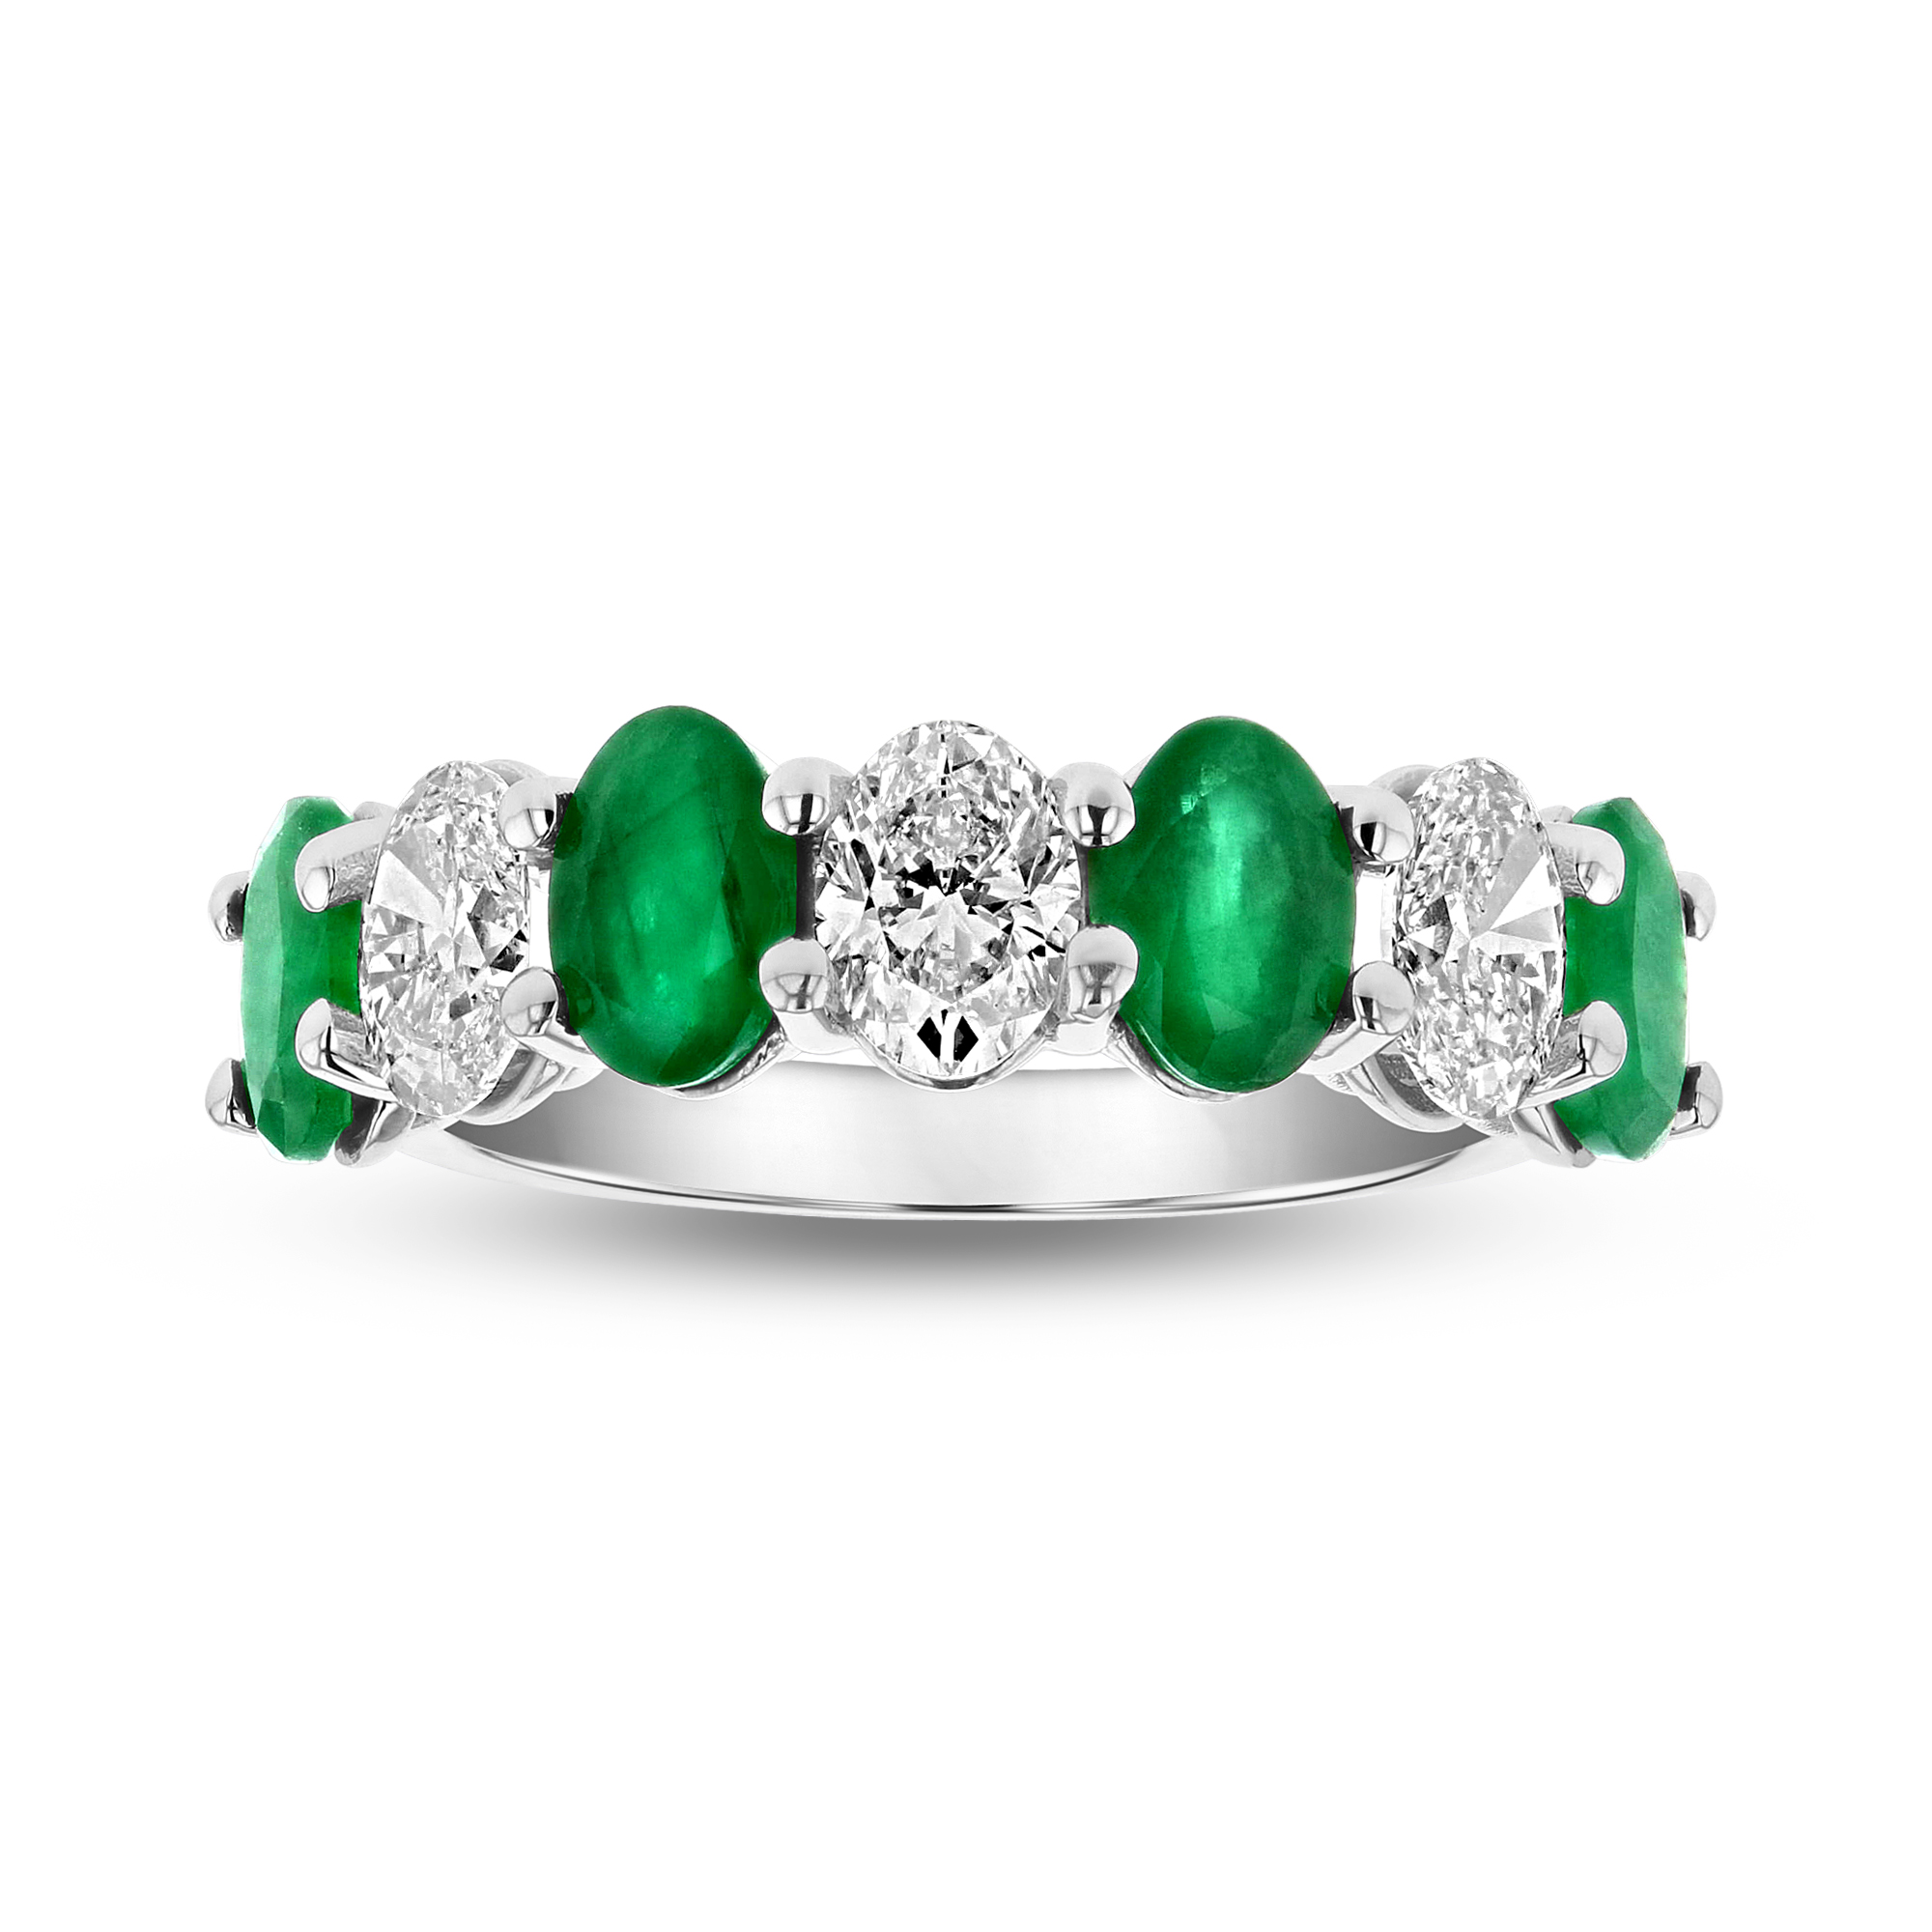 View 2.91ctw Diamond and Emerald Band in 14k White Gold